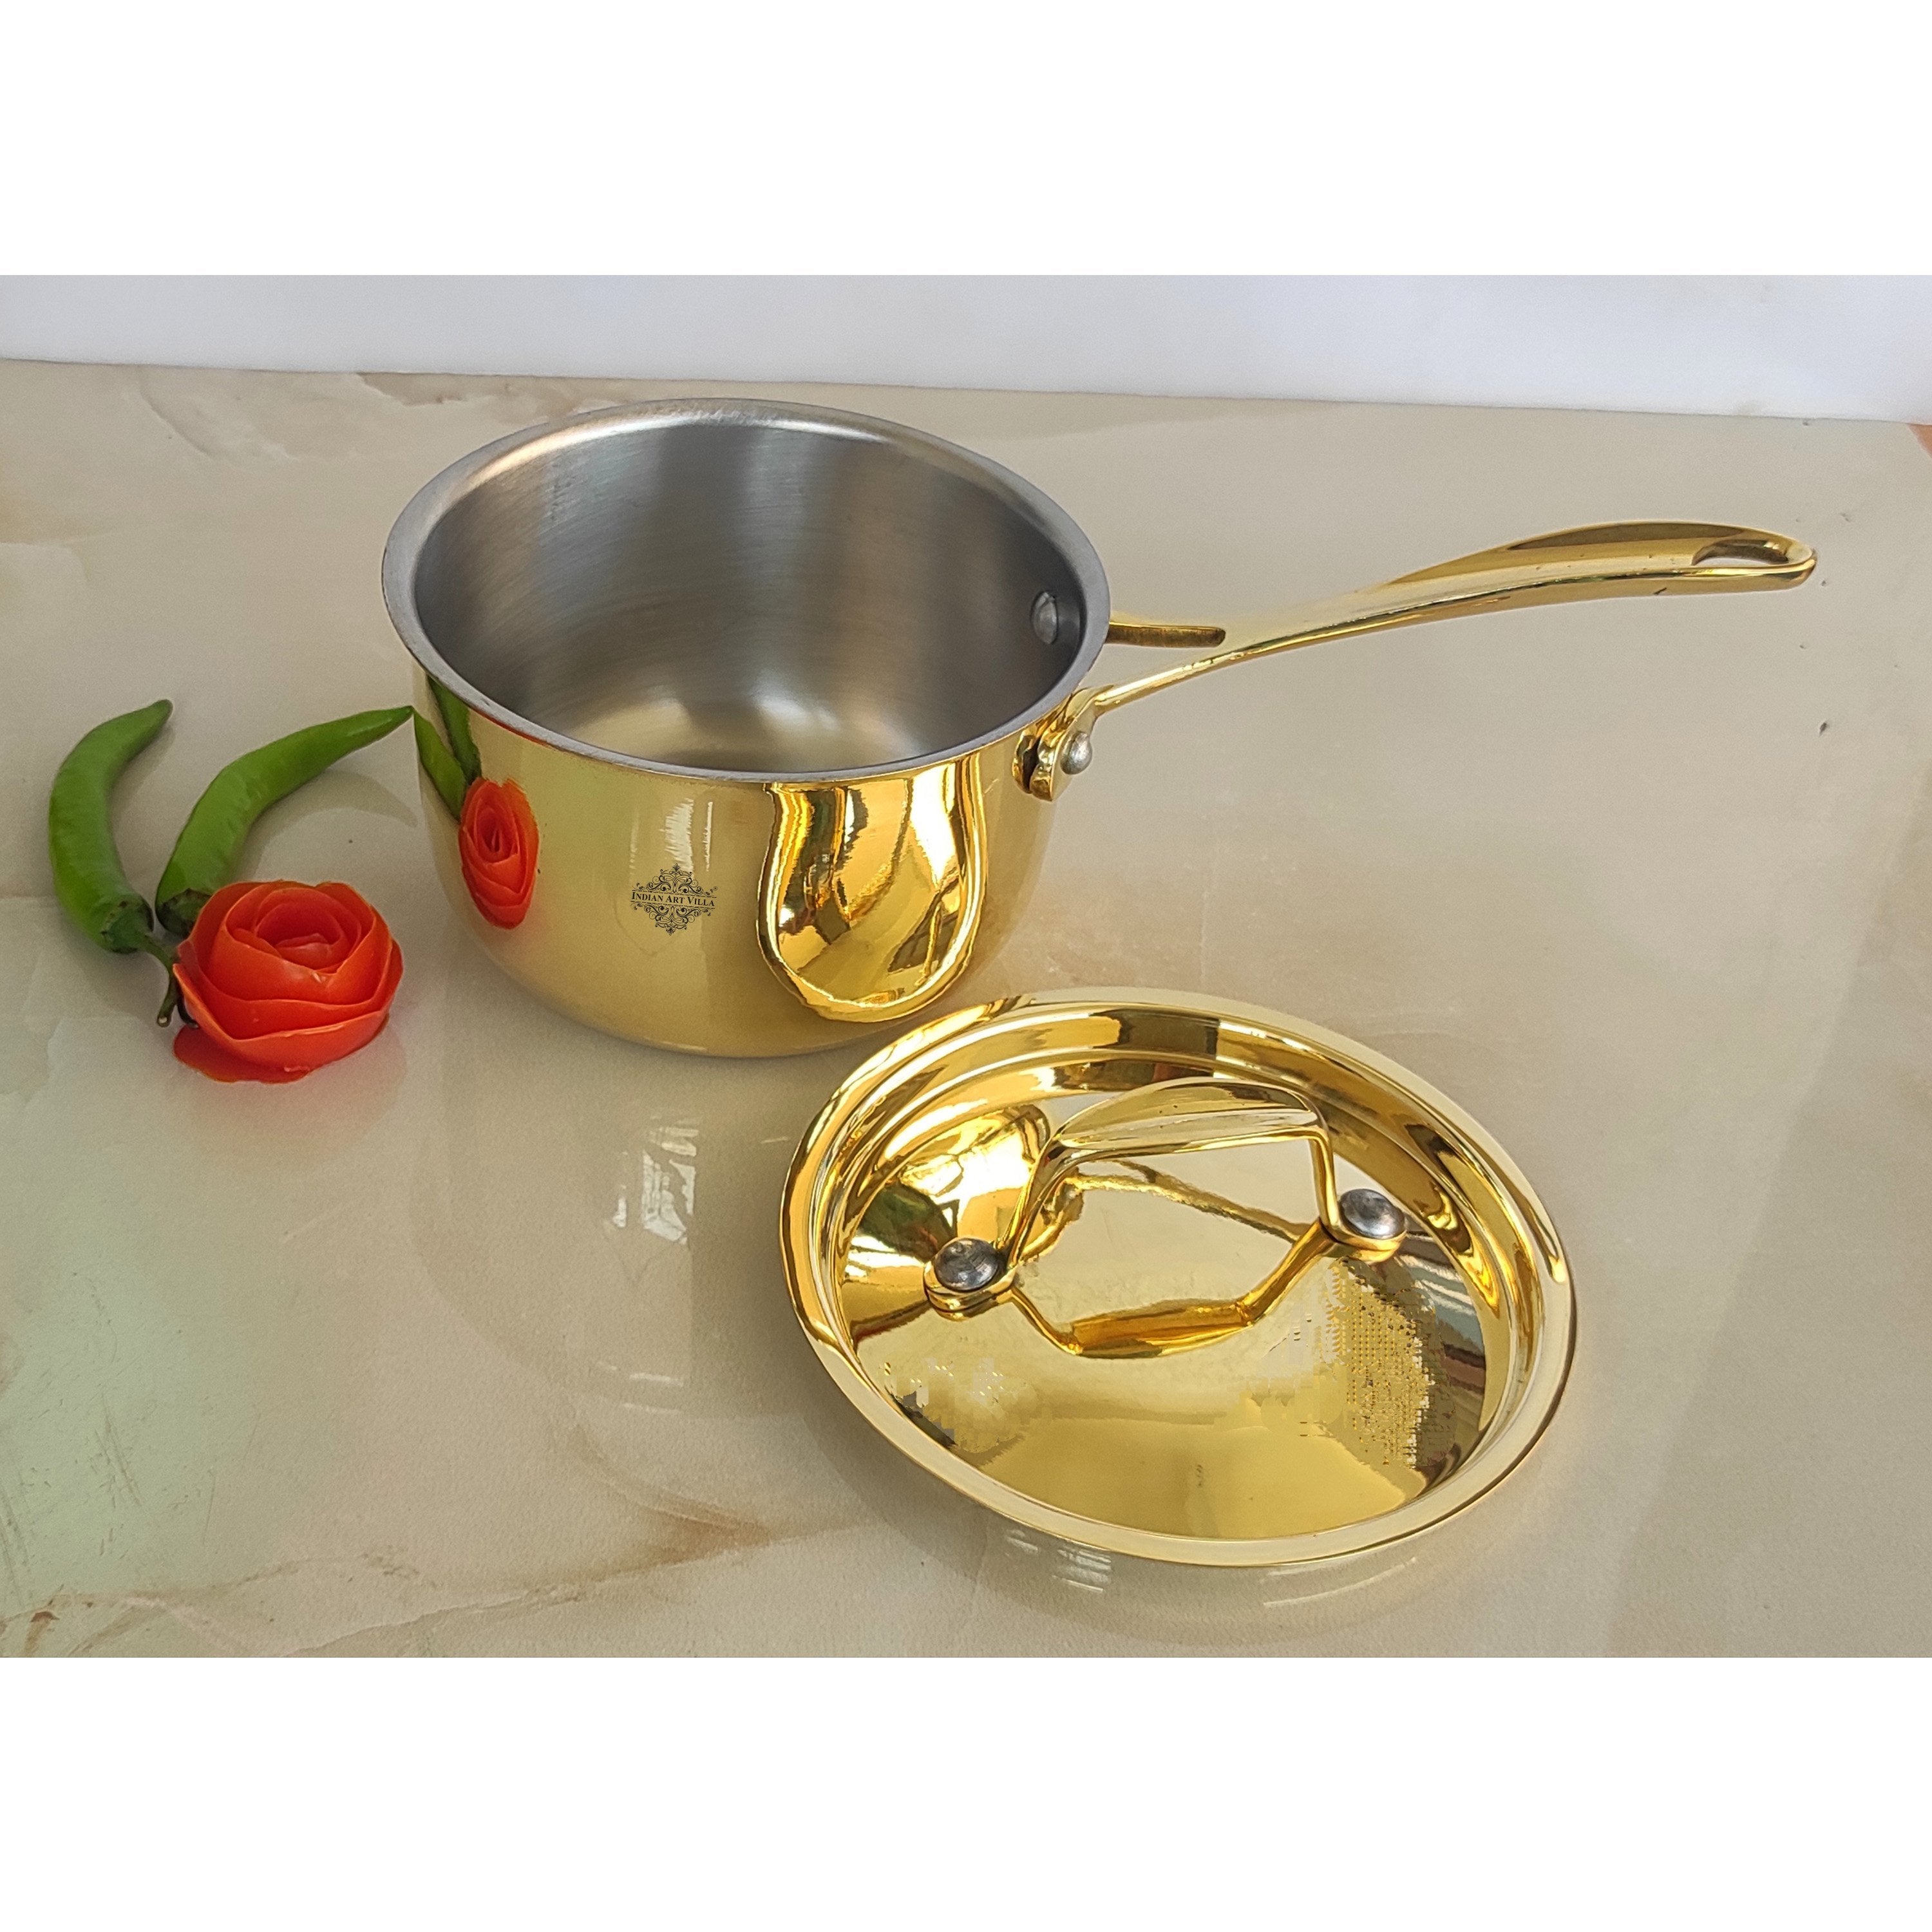 Buy Indian Art Villa Pure Brass Sauce Pan with Brass Lid and Handle with  Tin Lining Inside, Serveware, Cookware Online - Indian Art Villa